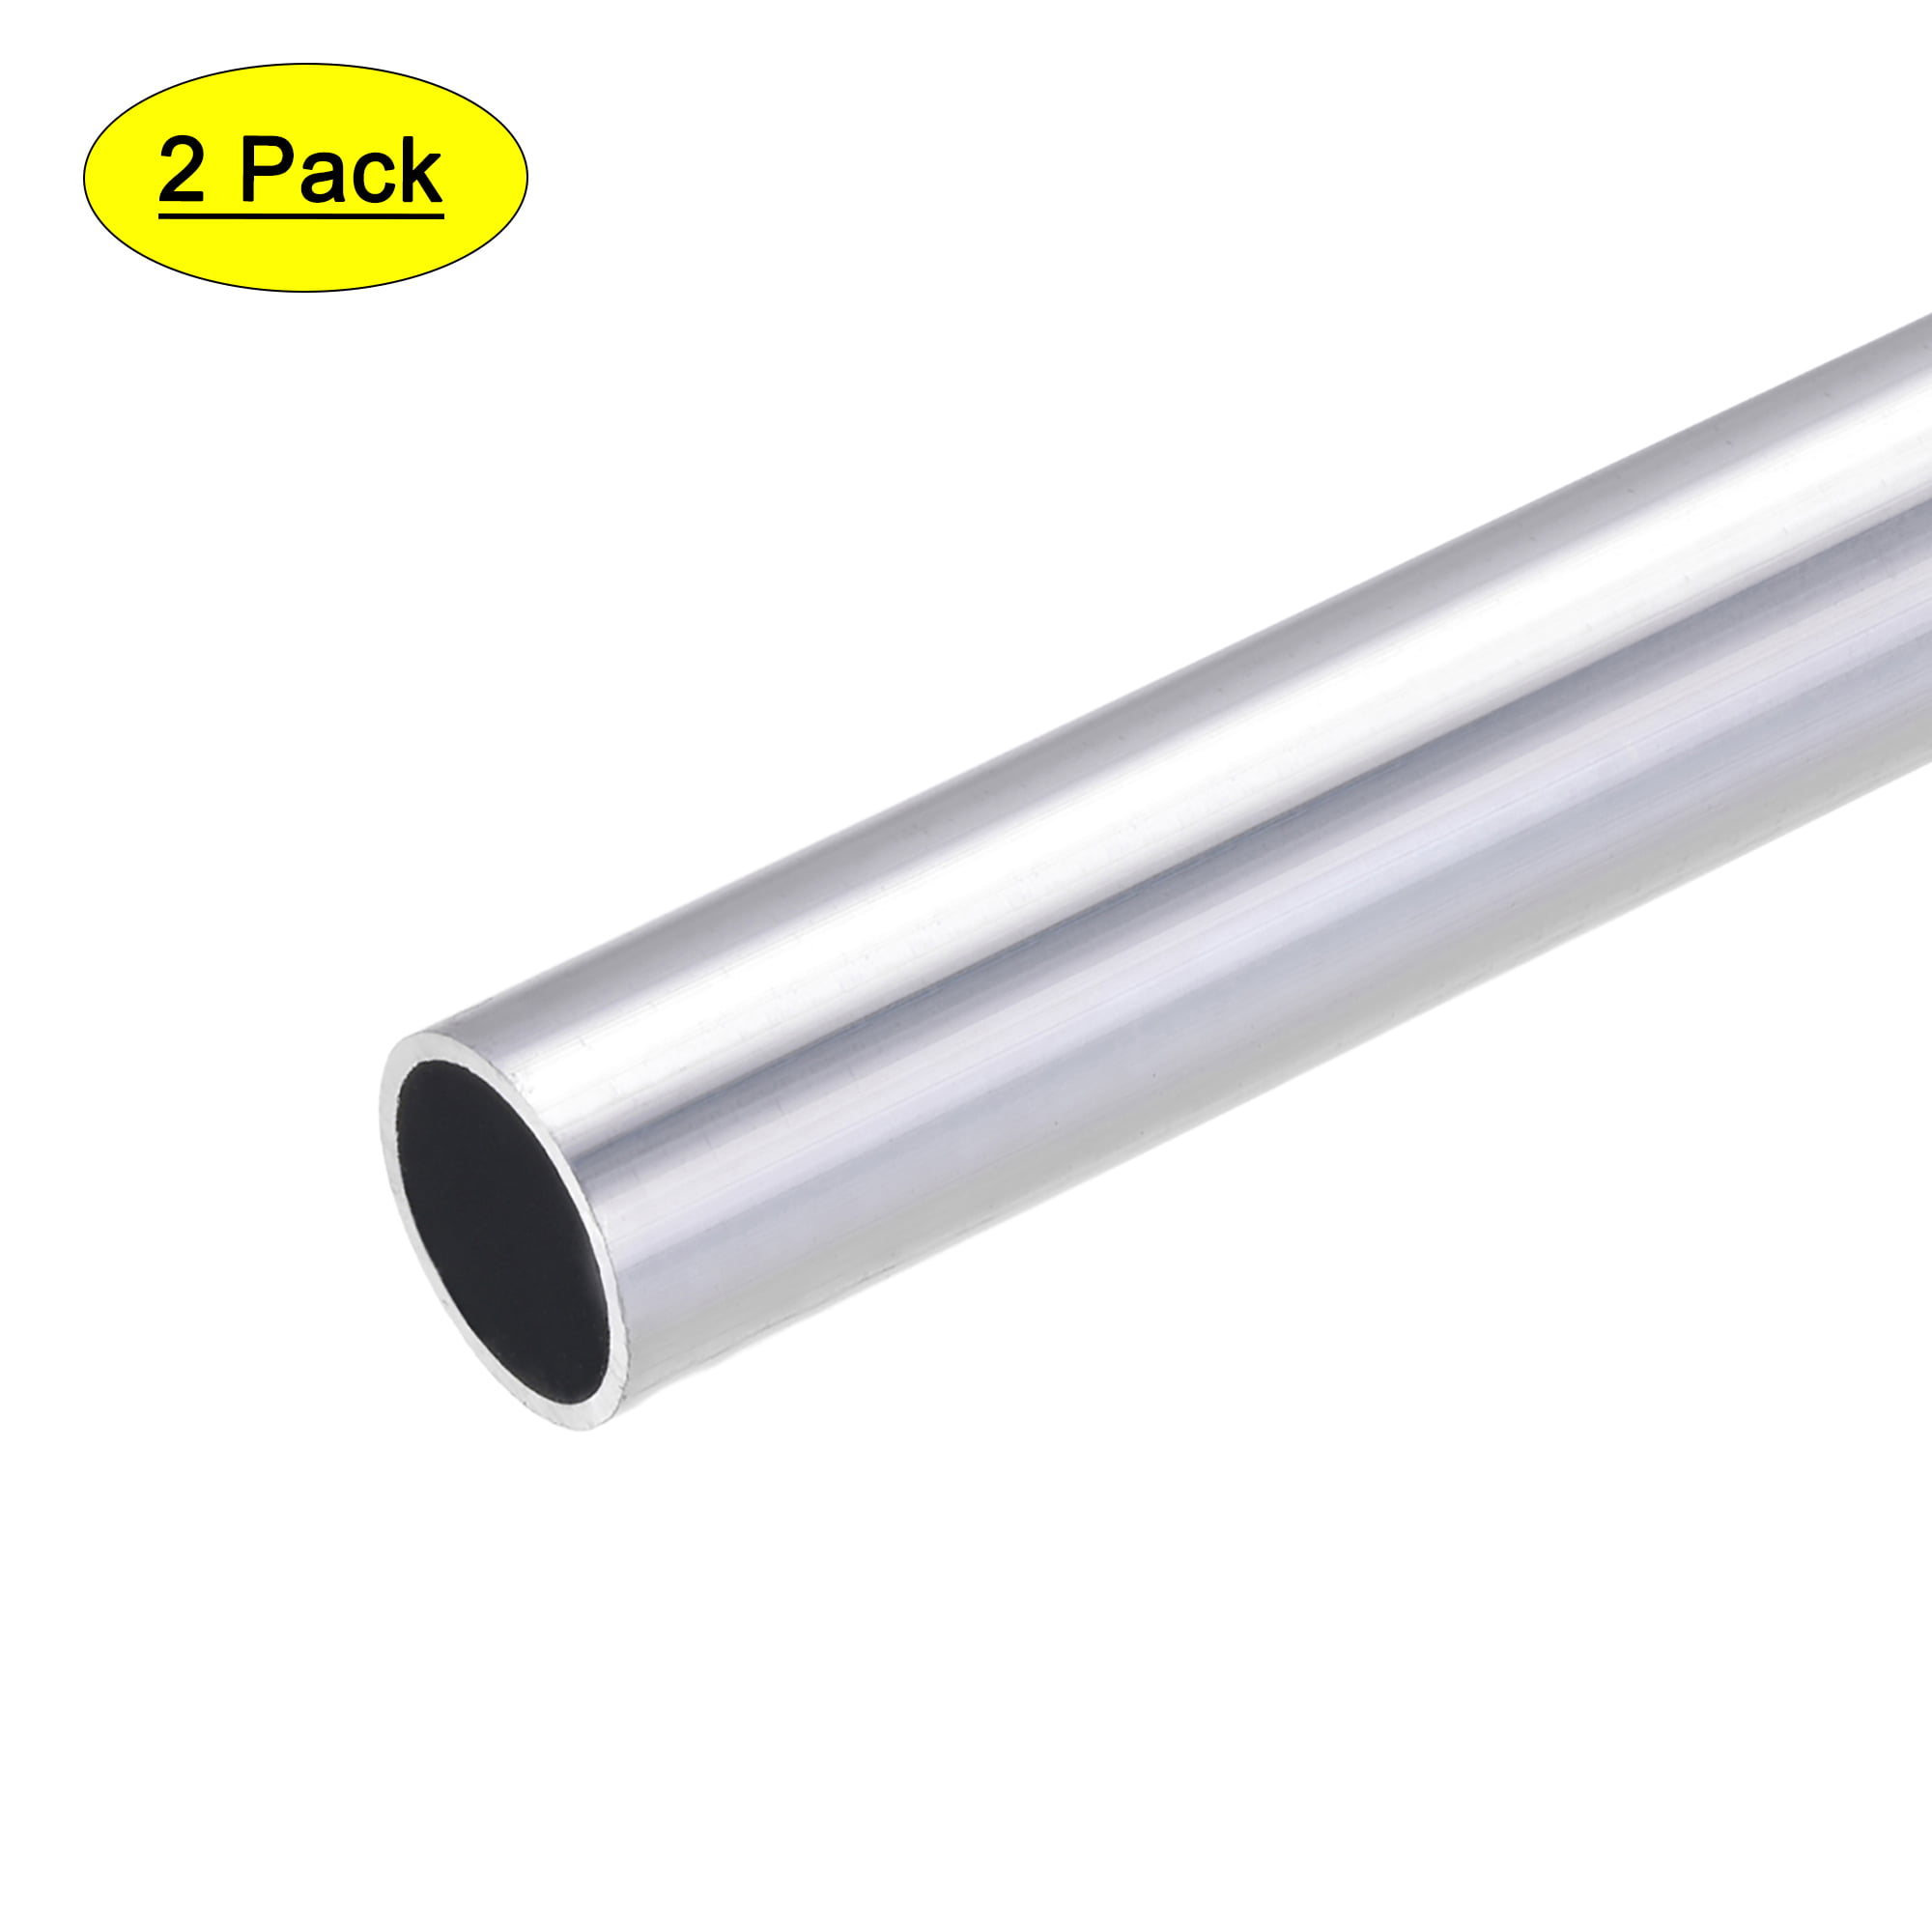 316 SEAMLESS STAINLESS STEEL TUBE X 200MM 2MM WALL 12MM OD X 8MM ID